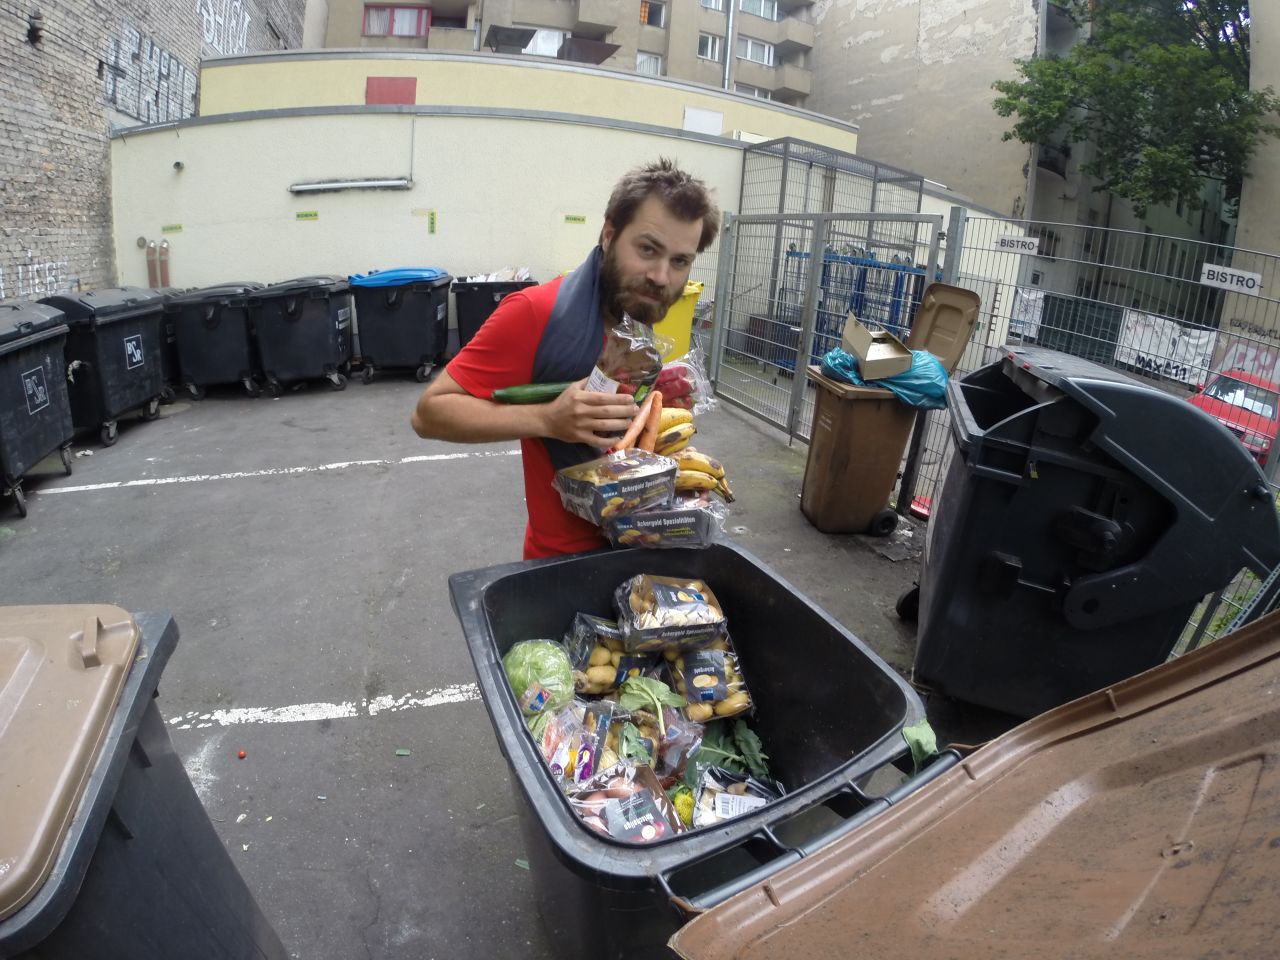 Frenchman Baptiste Dubanchet cycled from Paris to Warsaw eating only food that was consigned to the rubbish heap.